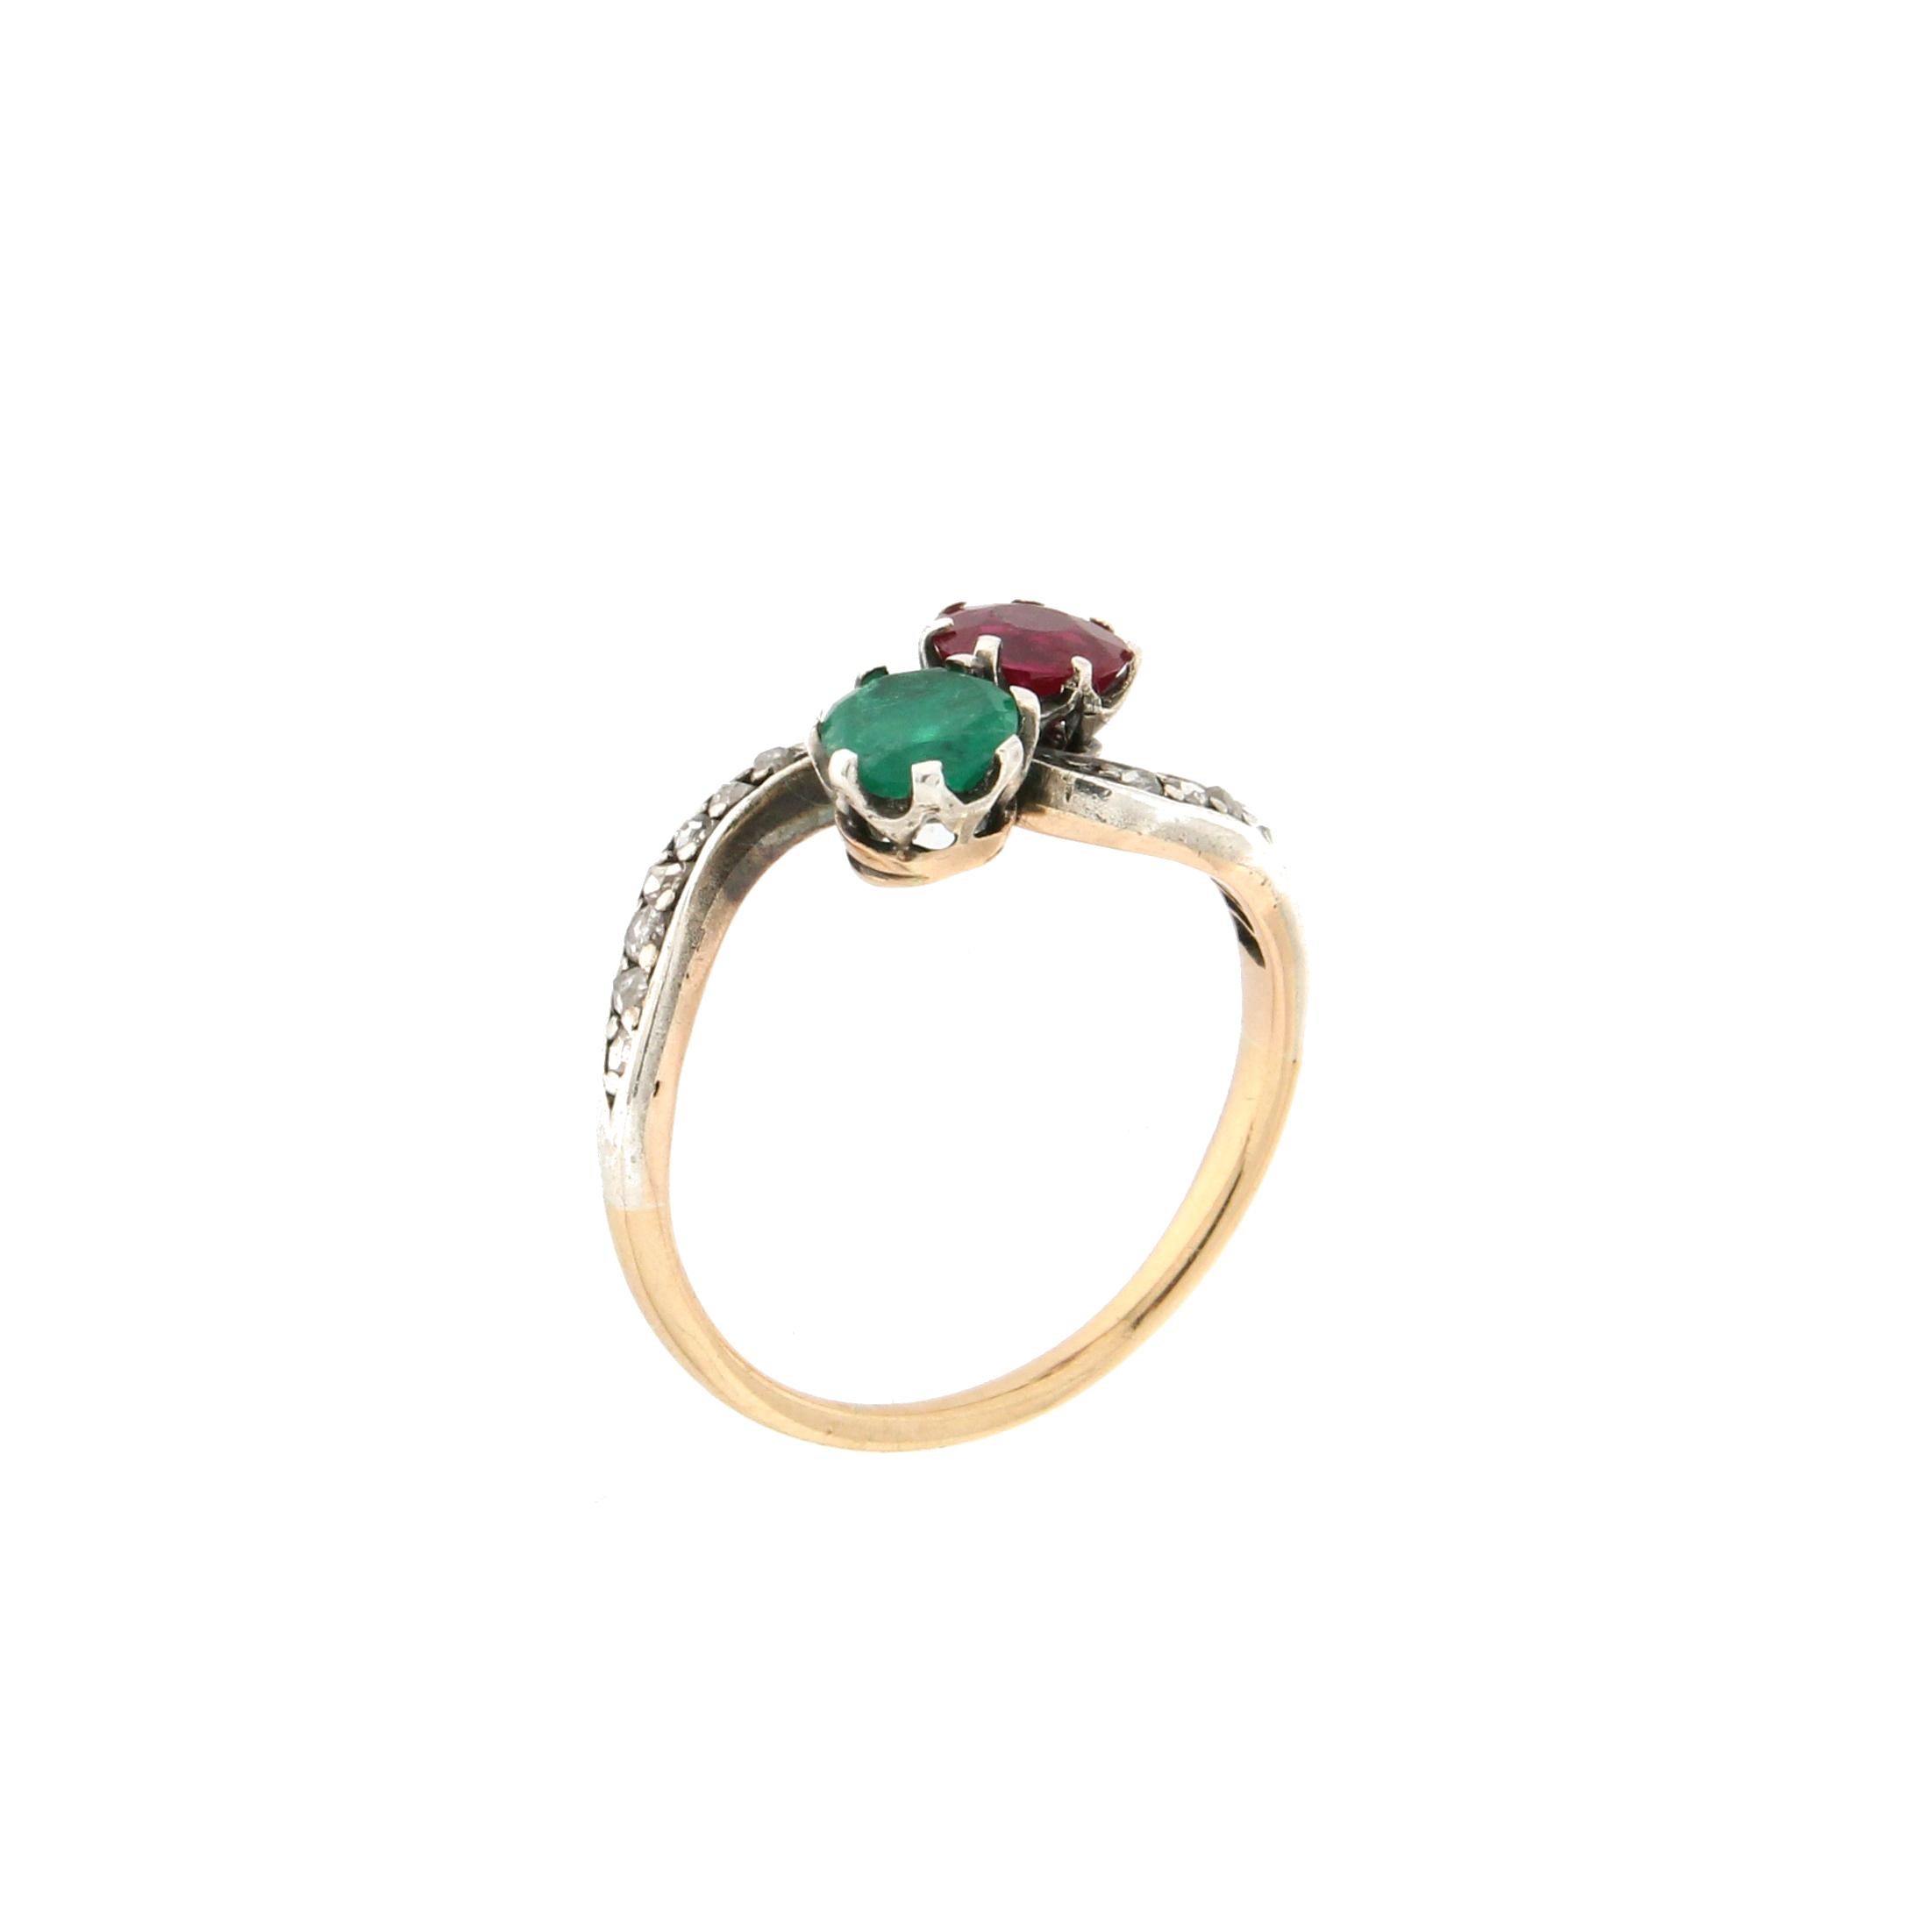 14 karat yellow gold and 800 karat silver cocktail ring. Handmade by artisans assembled with old cut diamonds, ruby and emerald.

Ring total weight 2.60 grams
Ruby and emerald total weight 1.17 karat
Ring size 7.25 US 15 Ita
(all rings are can be